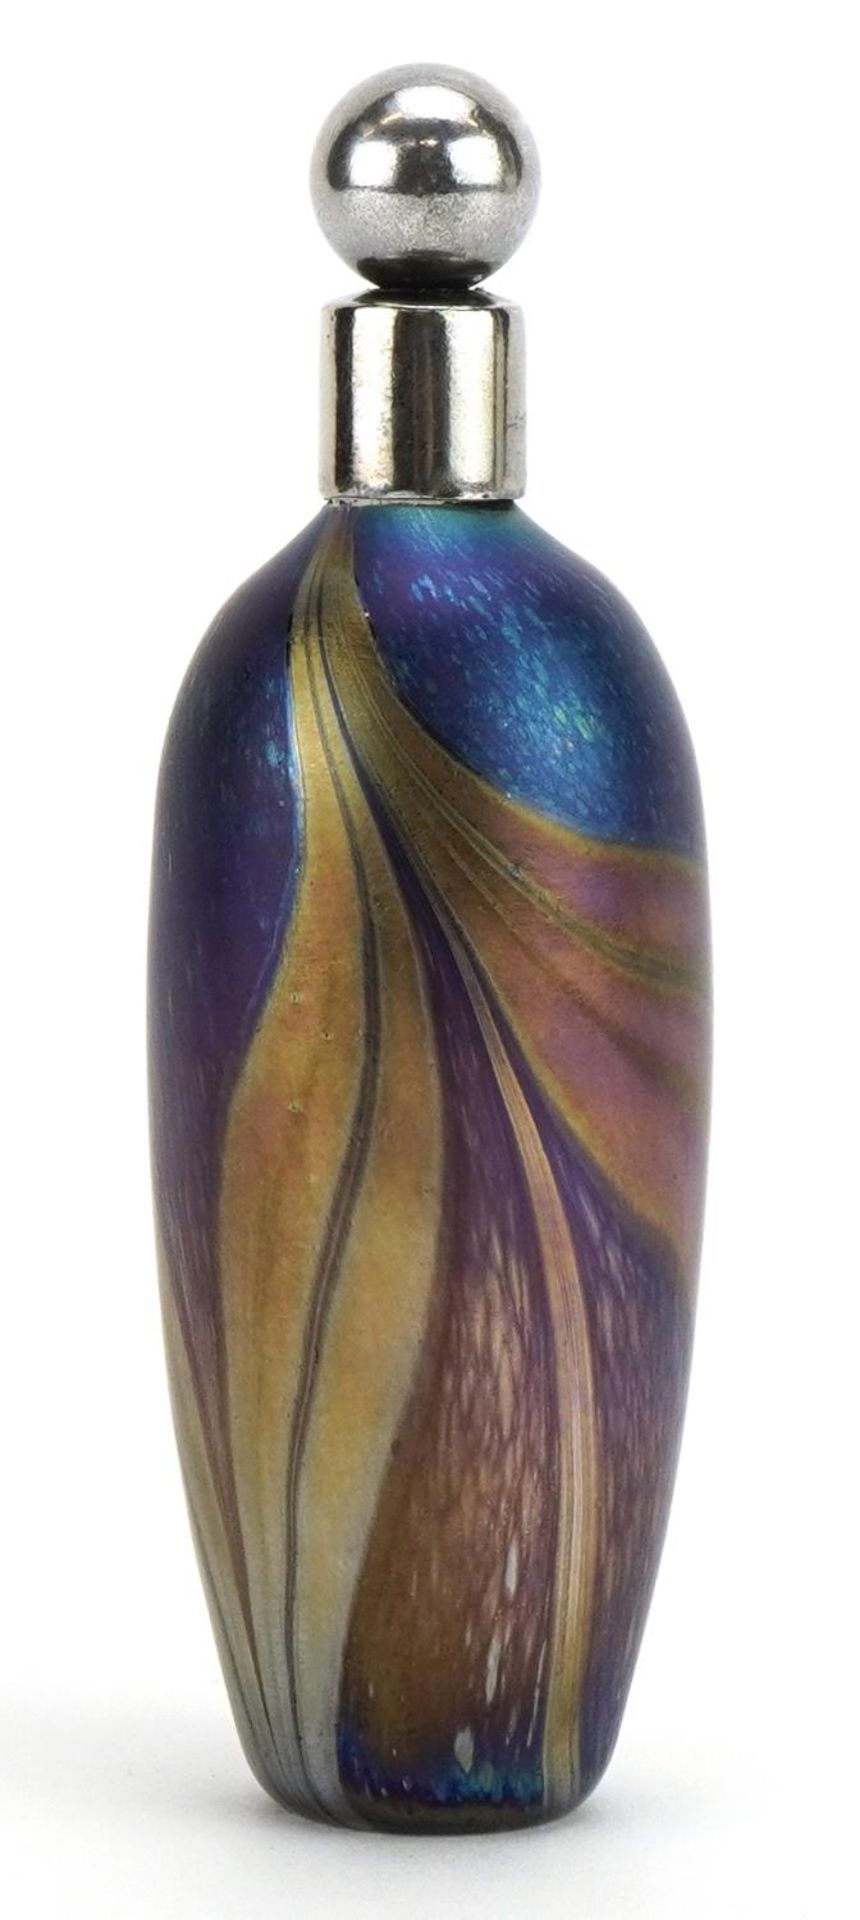 John Ditchfield, Glasform iridescent art glass scent bottle with combed decoration and white metal